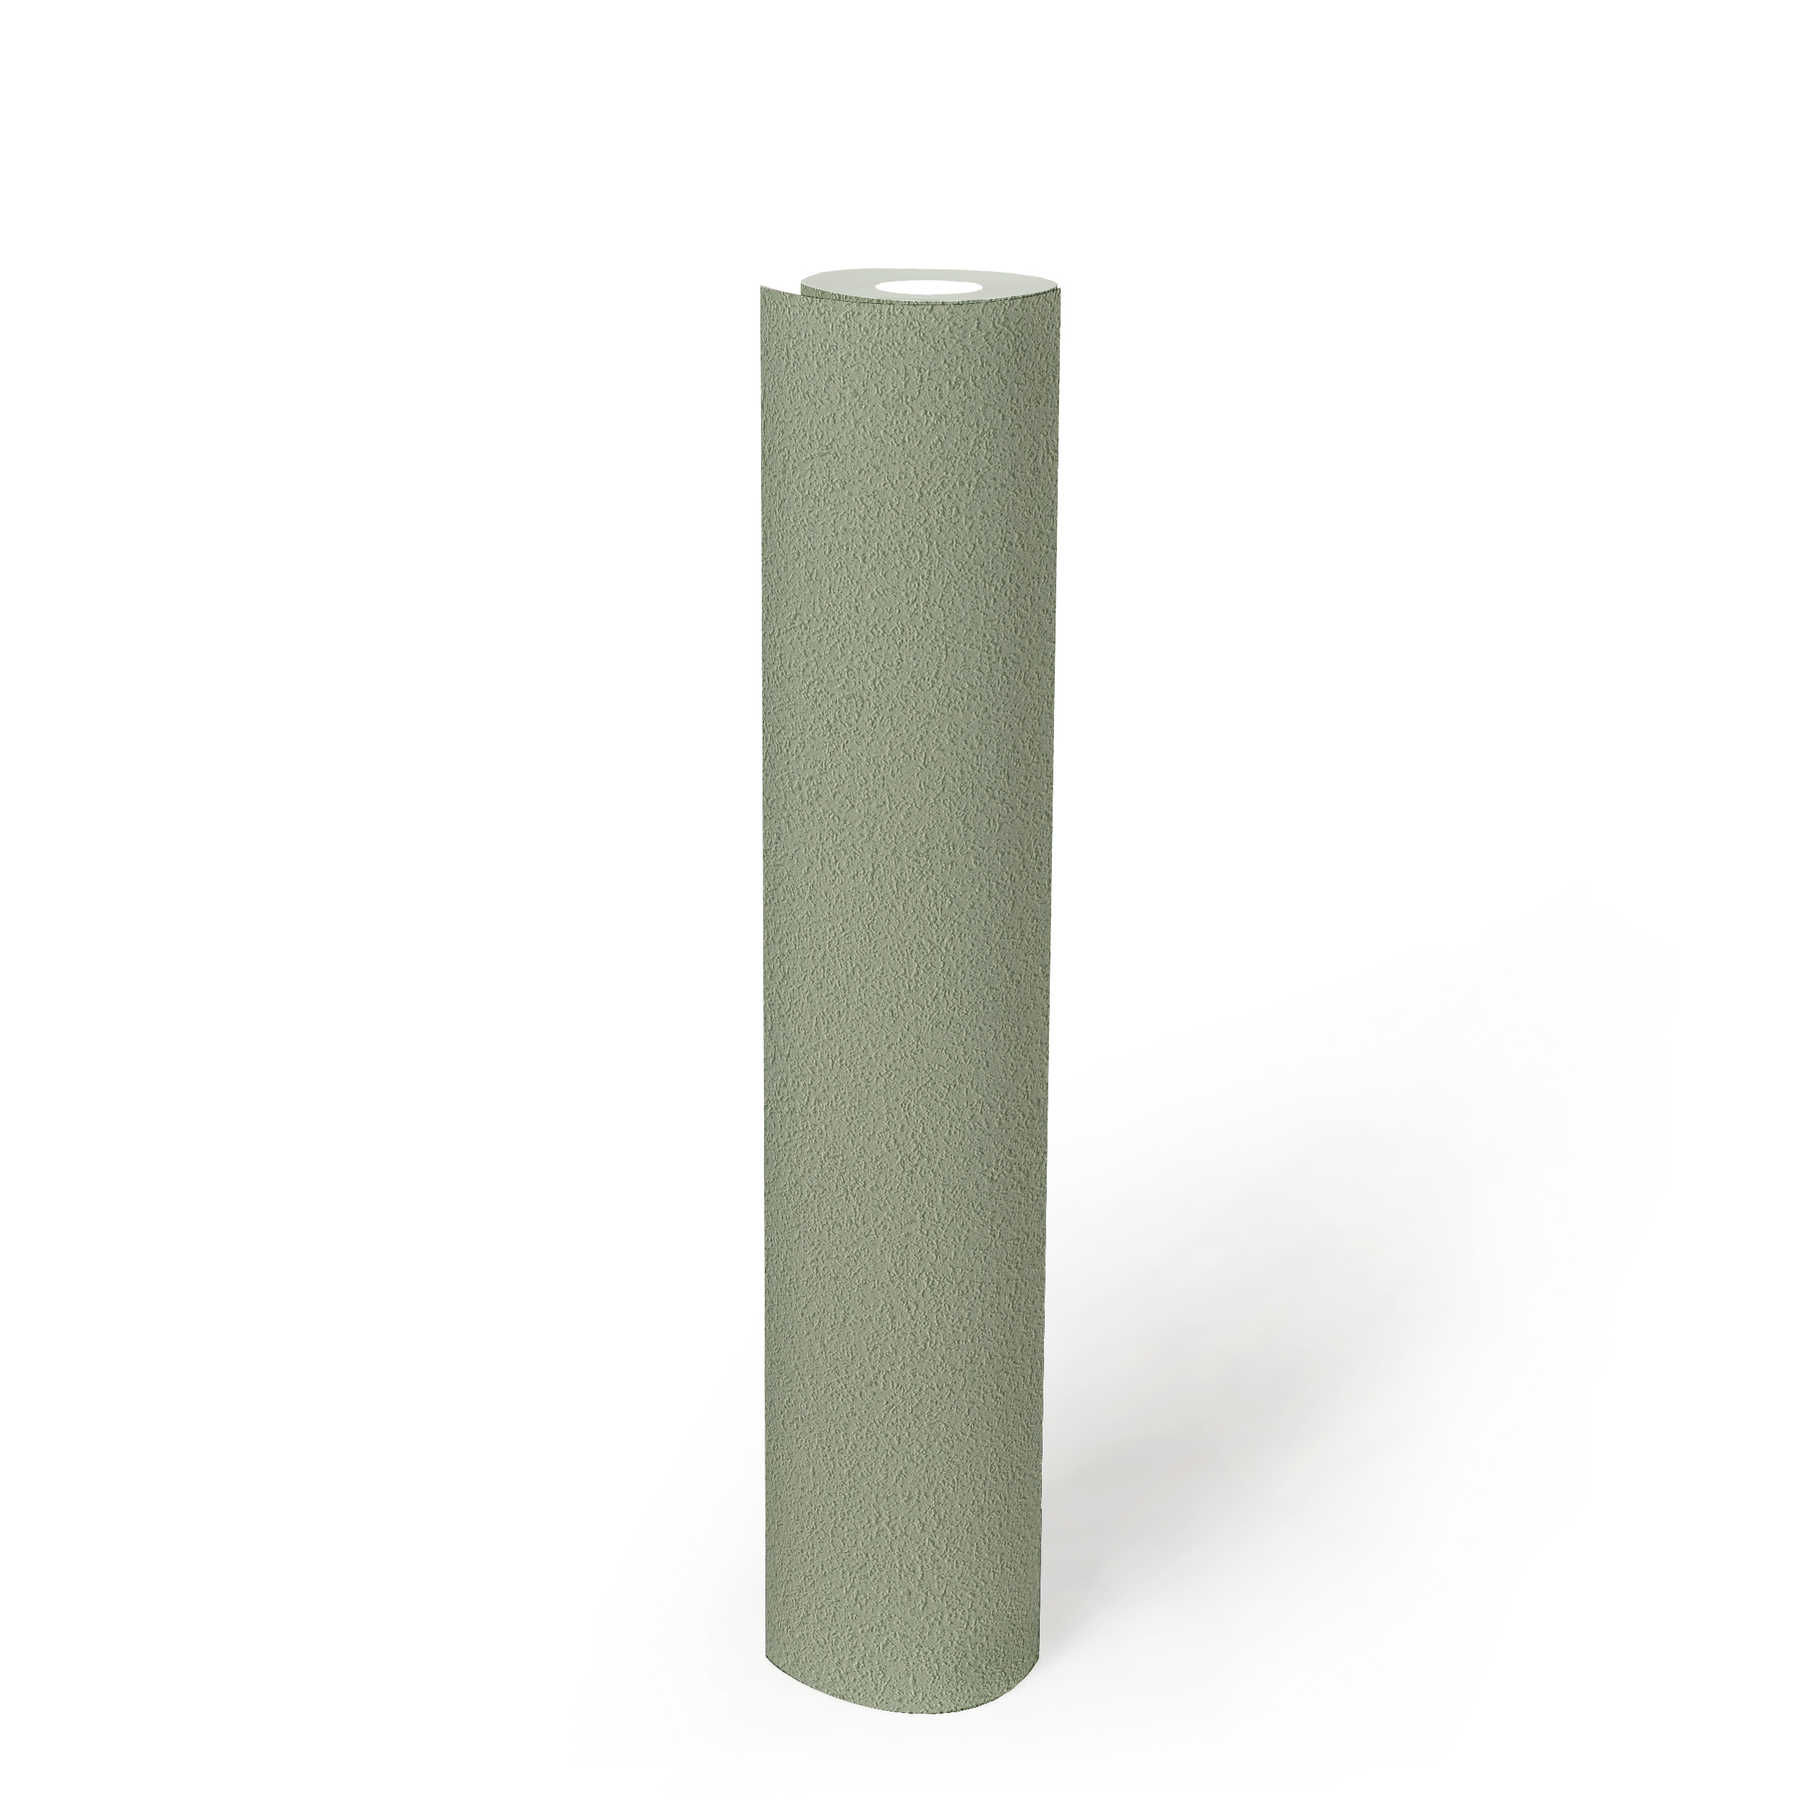             Plain wallpaper with fine surface texture - green
        